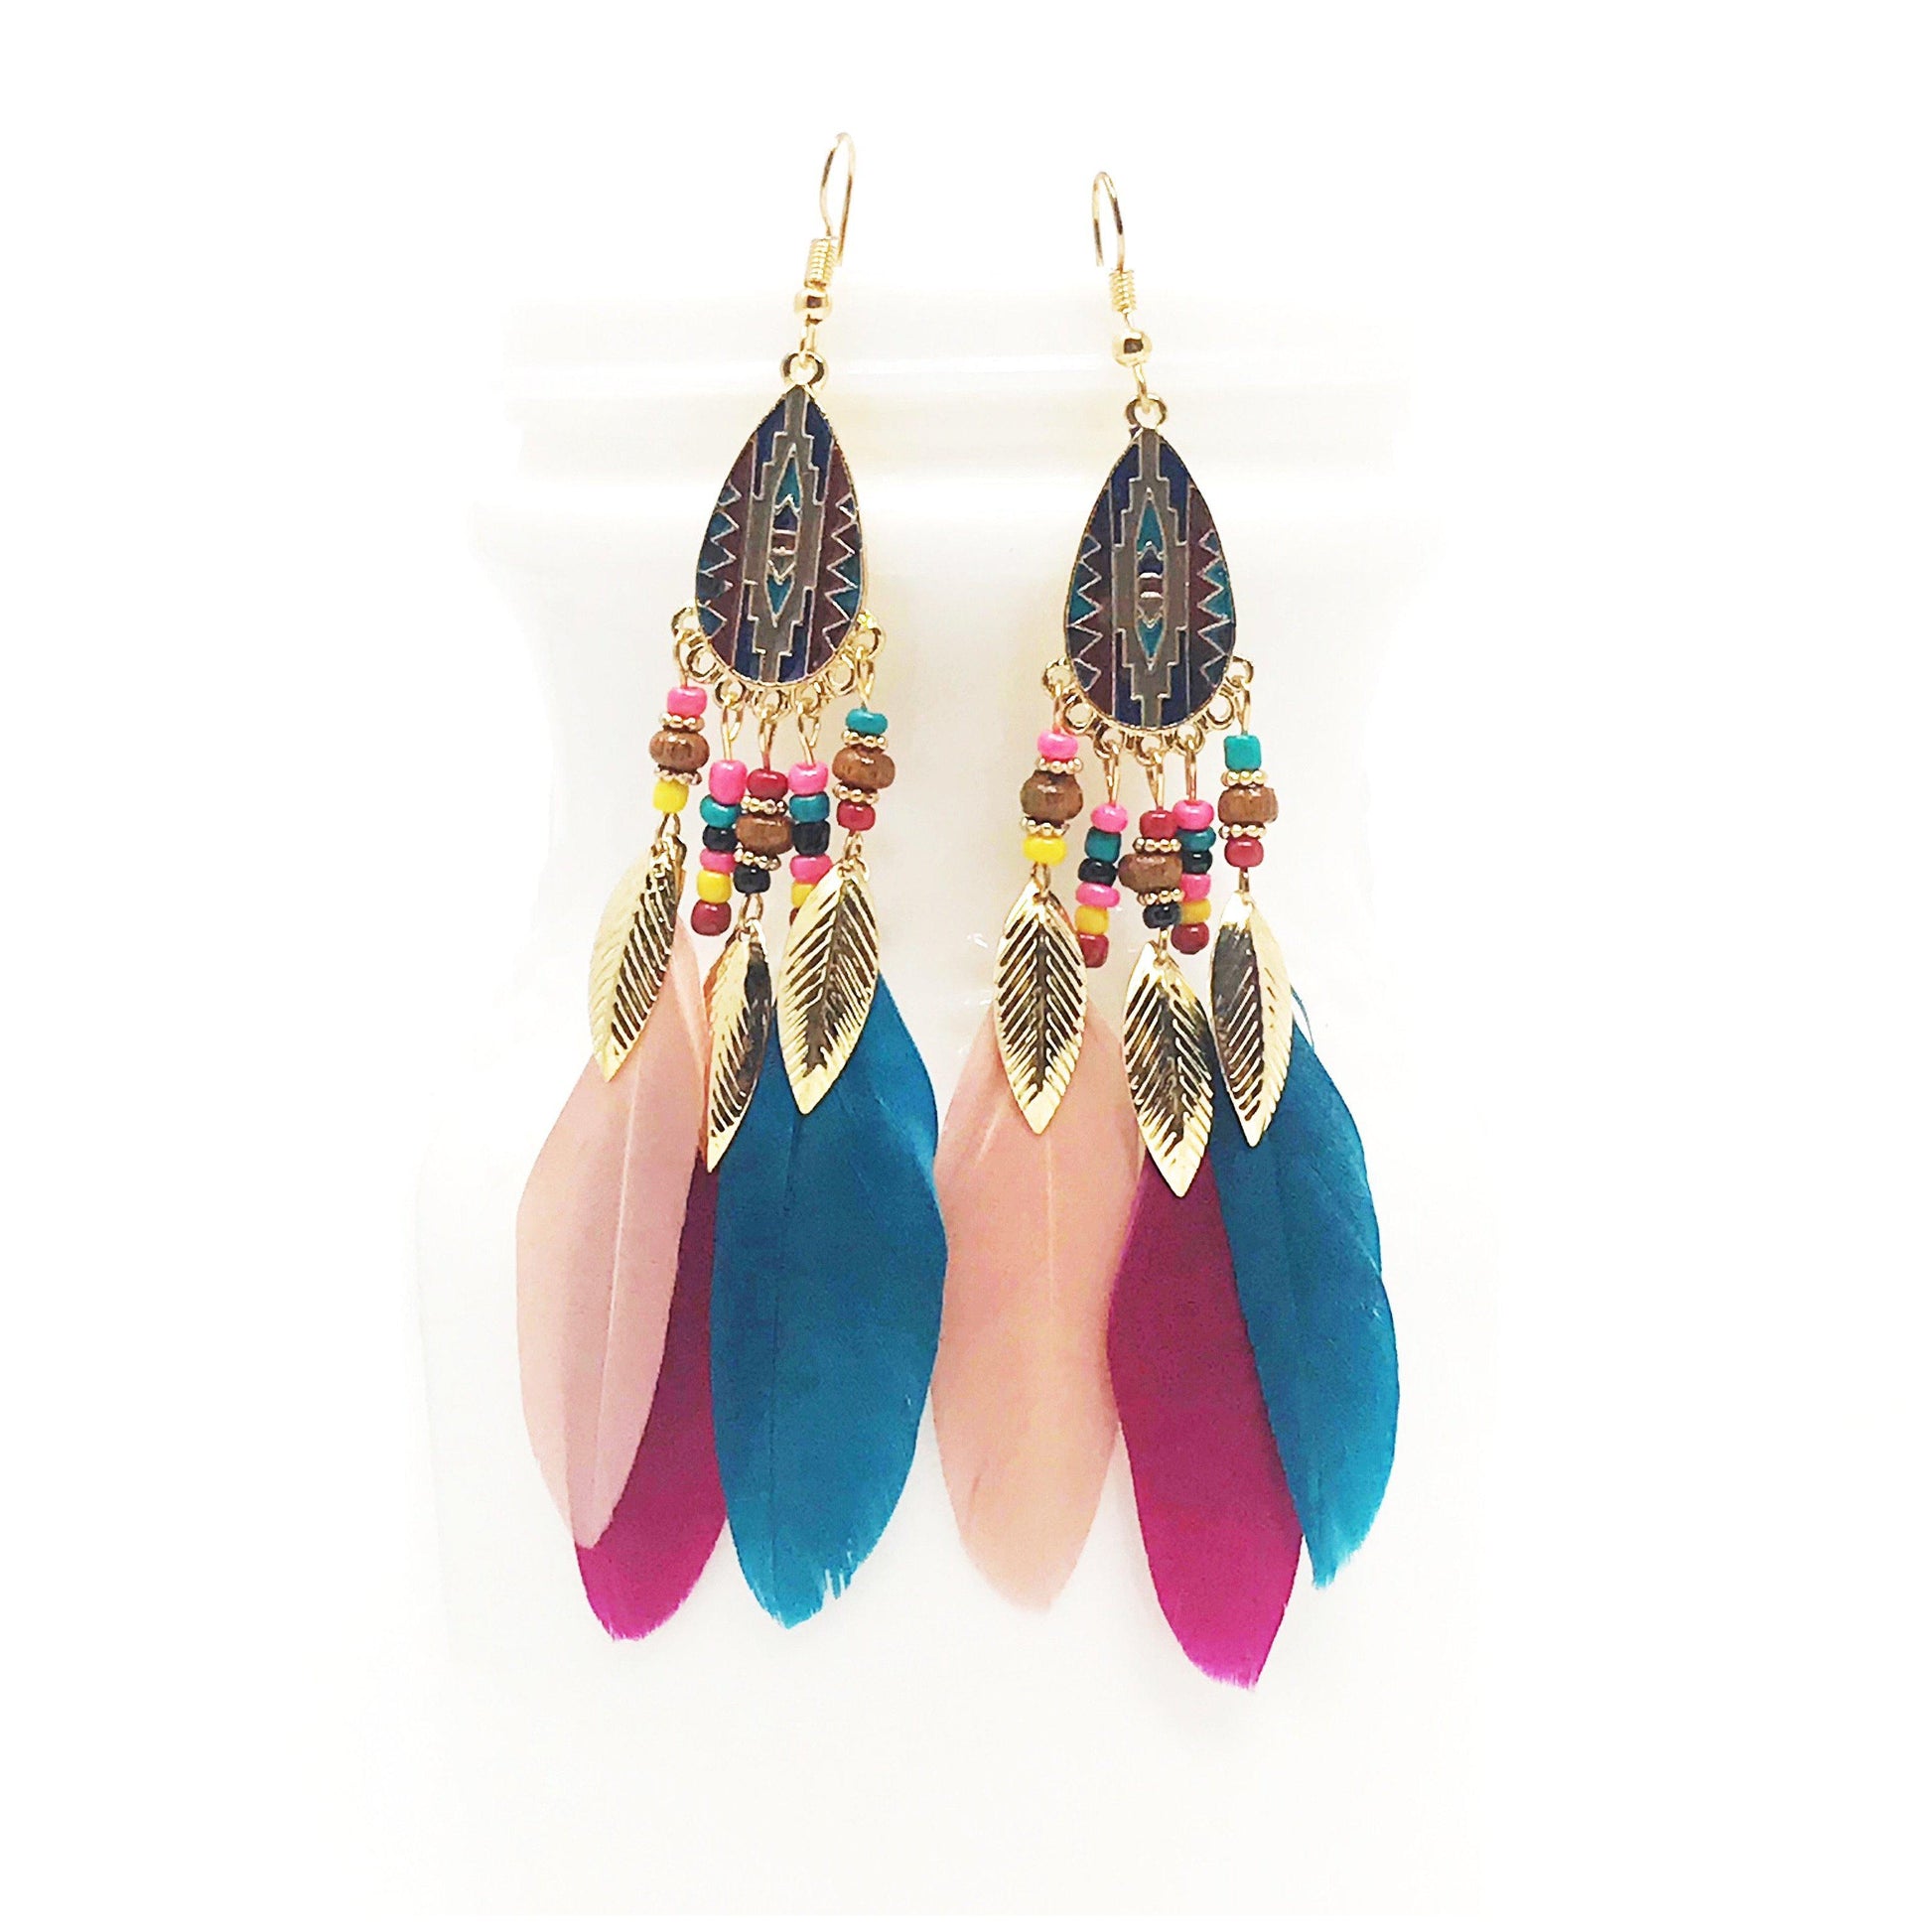 Multi-Colored Feather Earrings - Bohemian-Inspired Vibrant Accessories